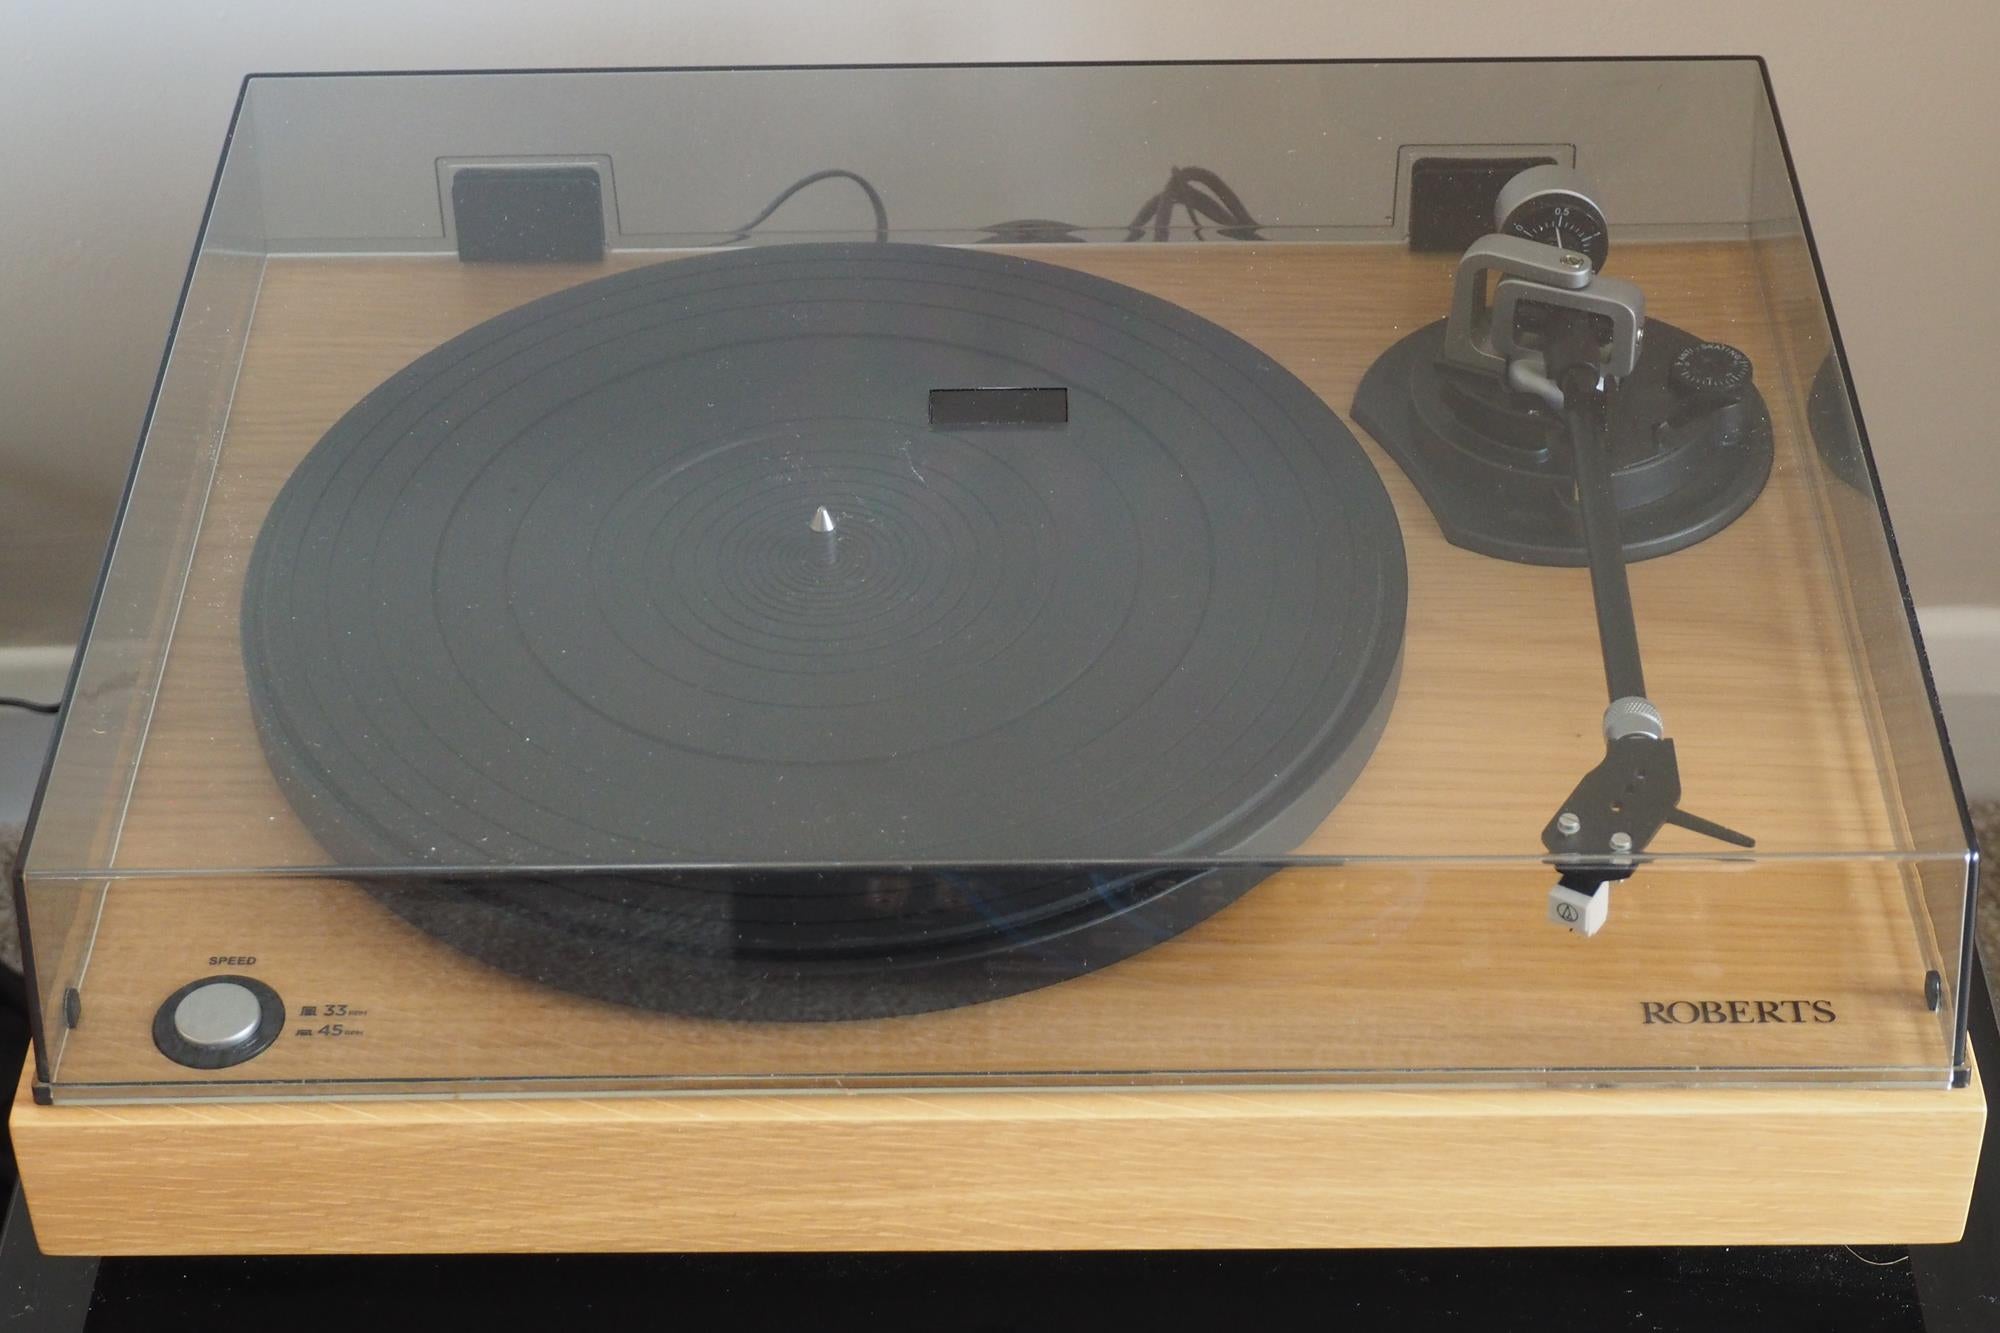 Roberts radio RT100 turntable on a wooden surface.